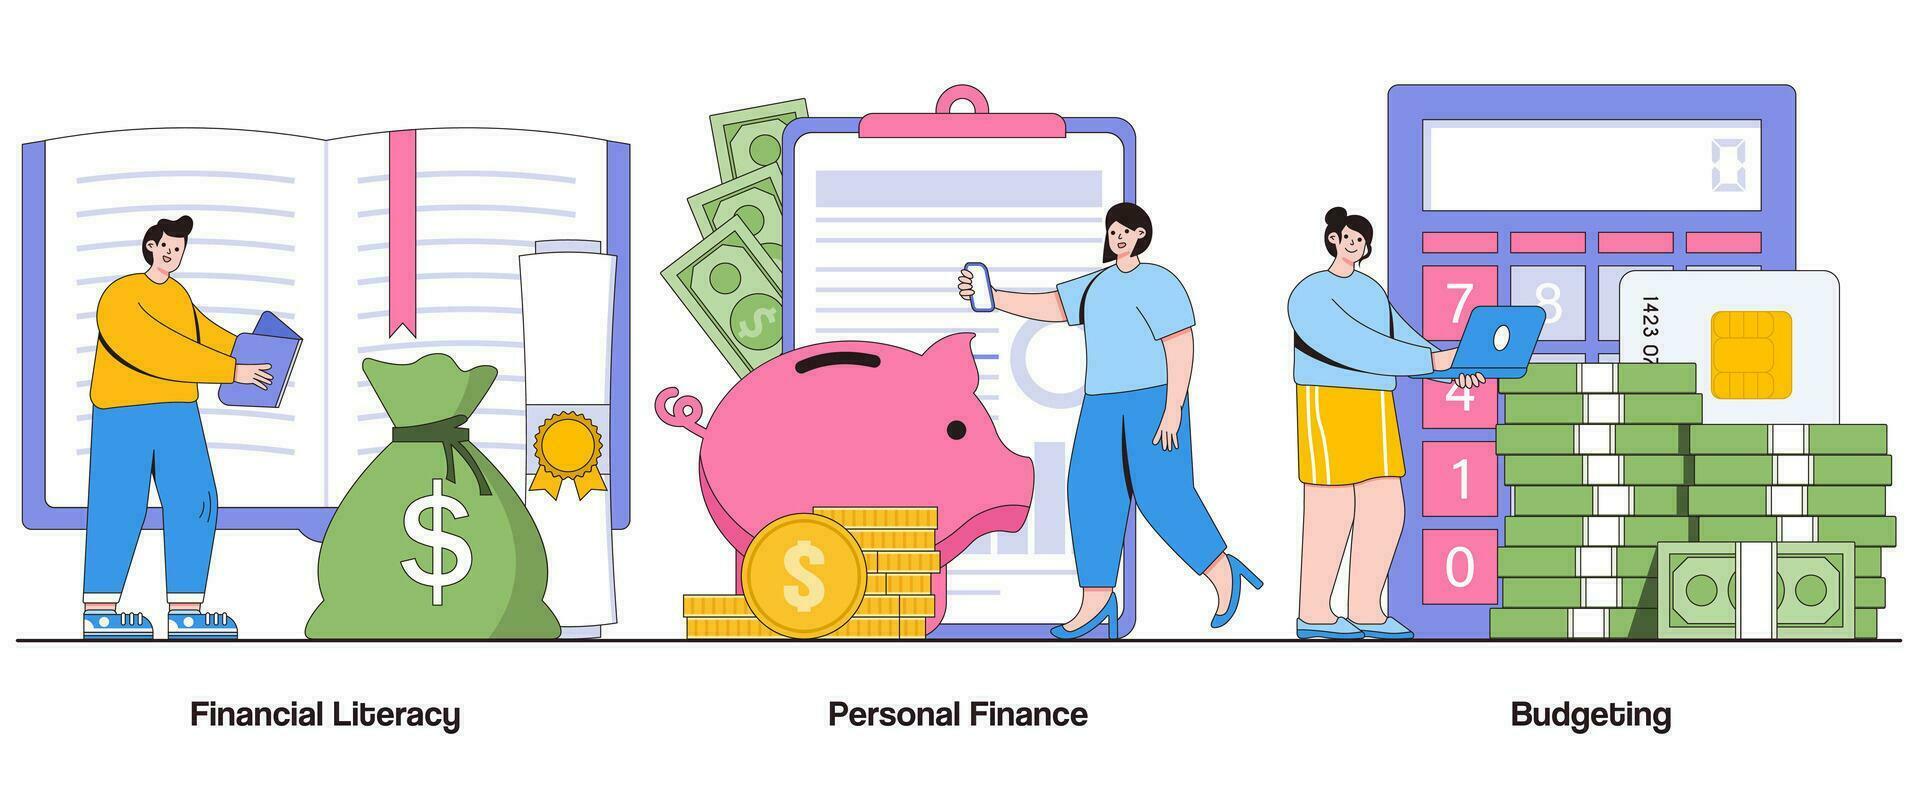 Financial Literacy, Personal Finance, Budgeting Concept with Character. Financial Education Abstract Vector Illustration Set. Money Management, Investment Knowledge, Financial Empowerment Metaphor